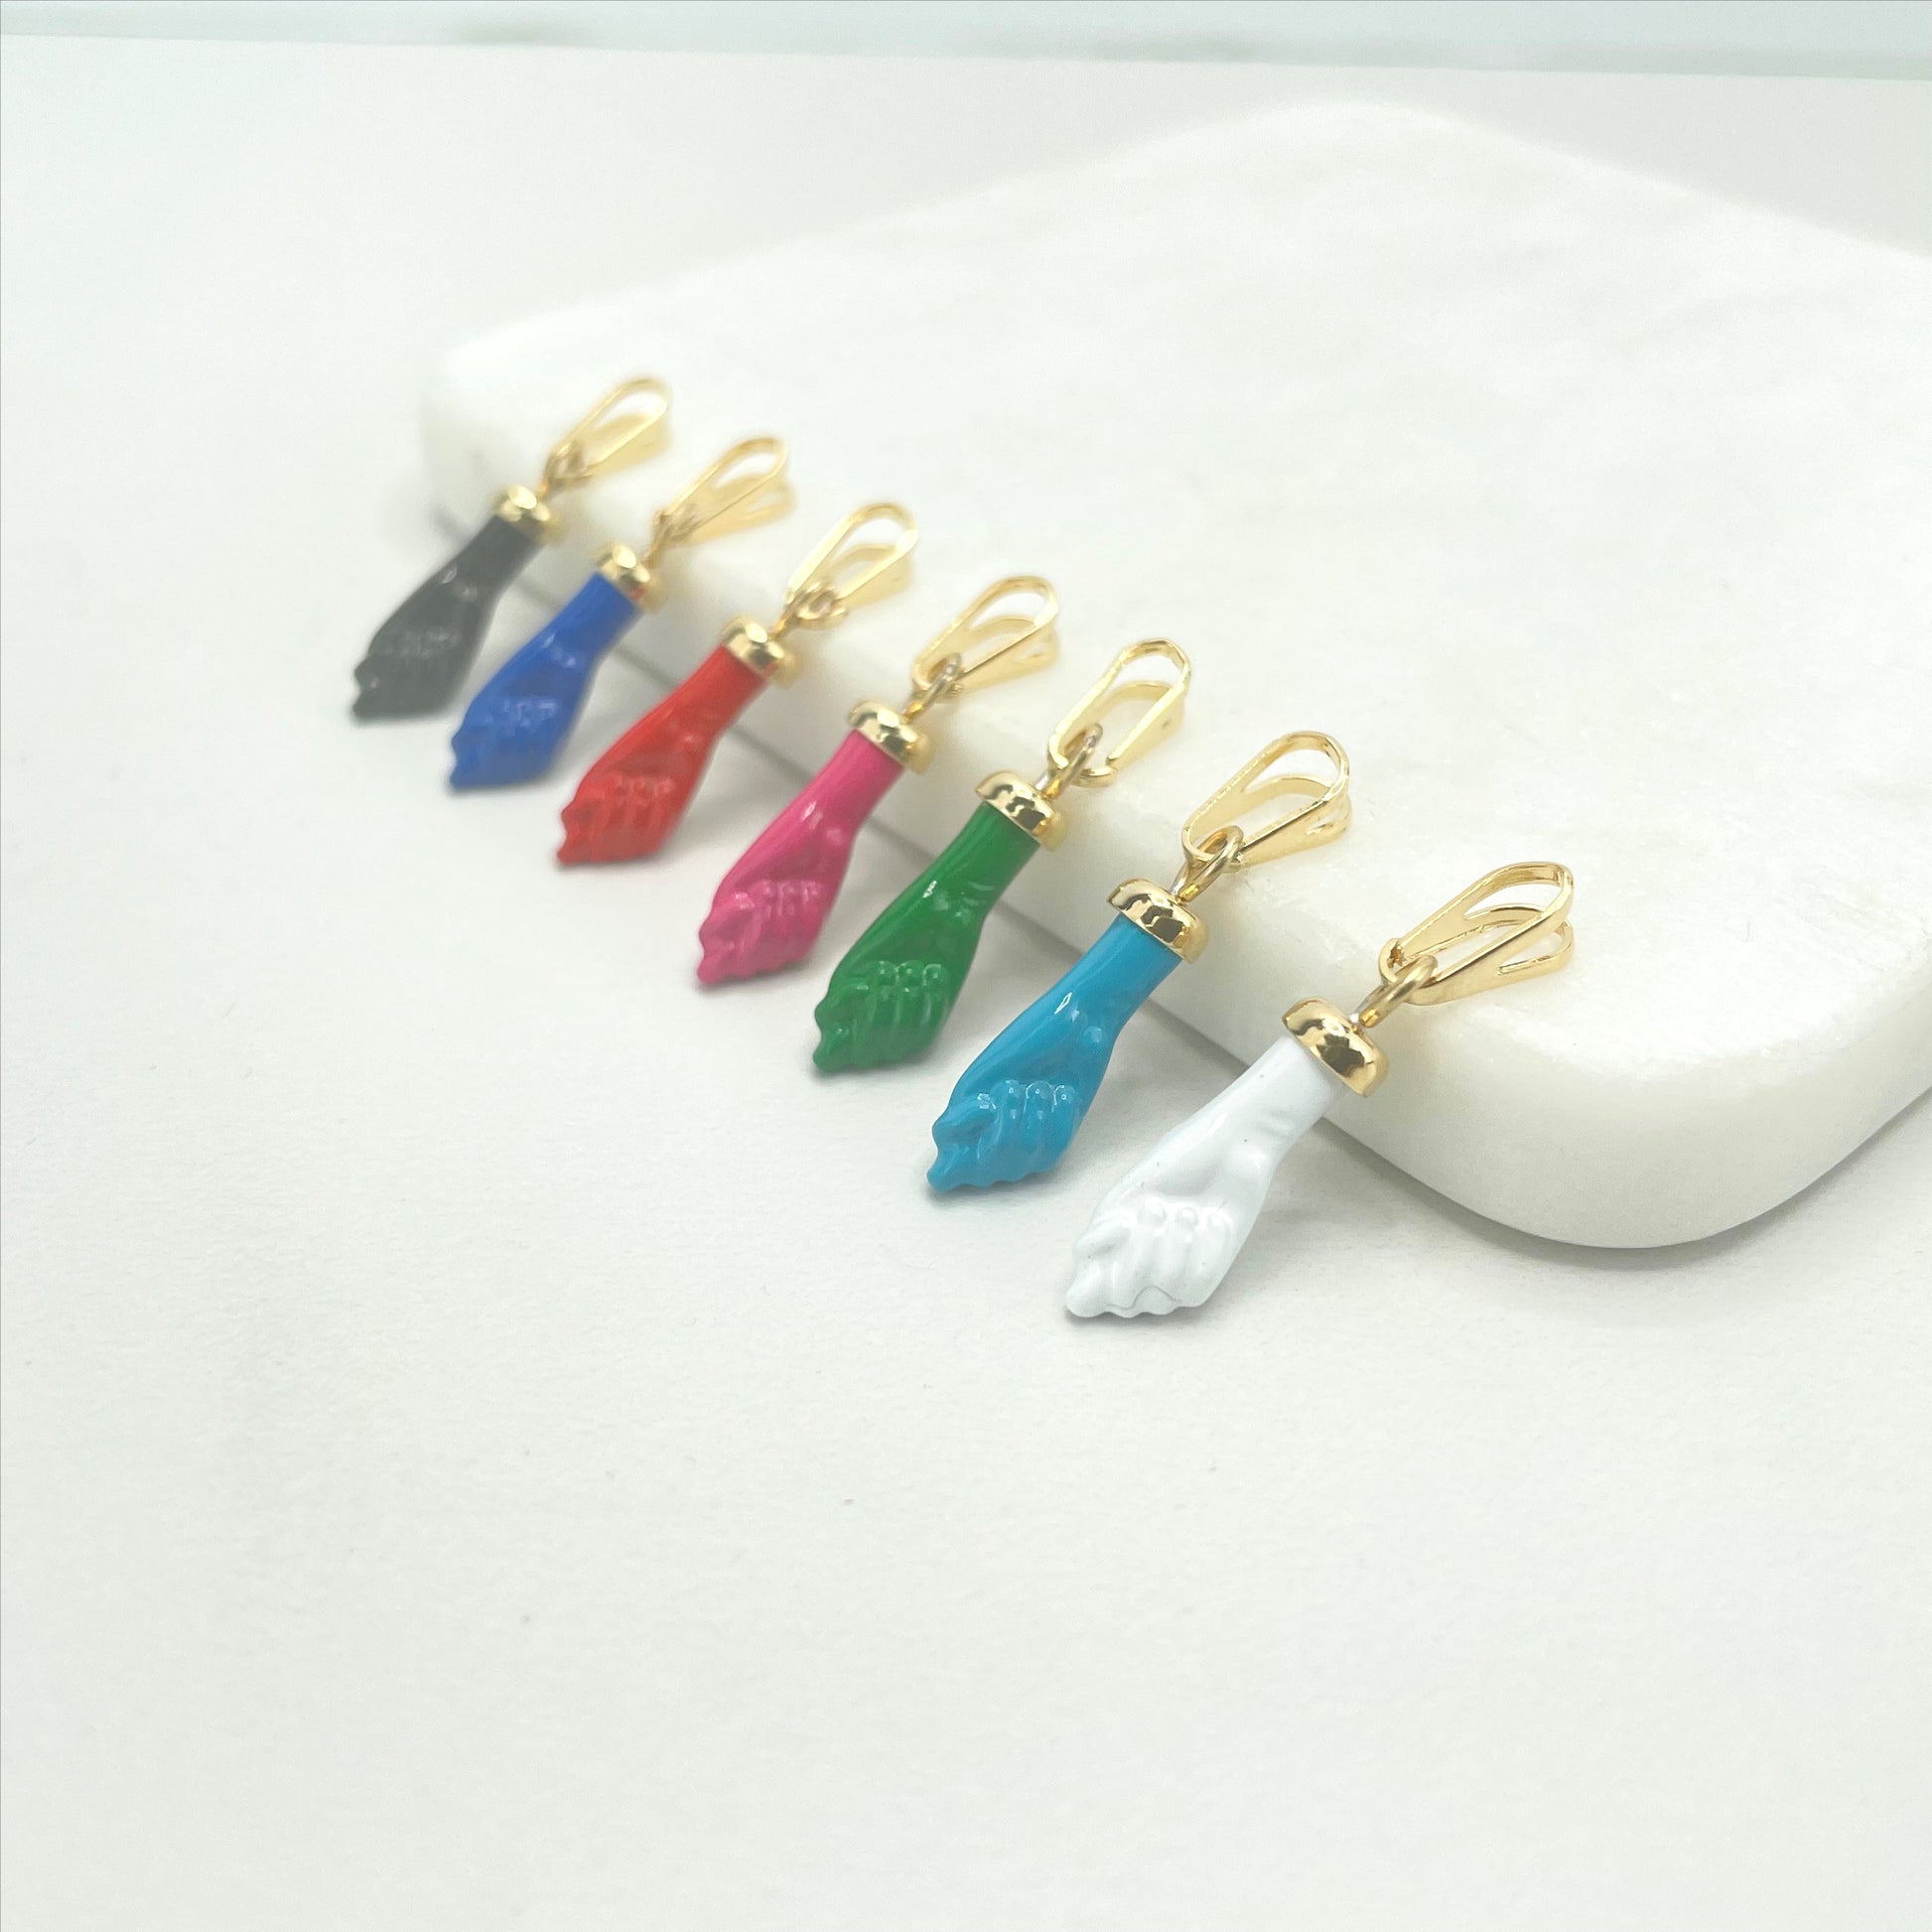 18k Gold Filled Colored Enamel Figa Hand Charms in White, Green, Sky Blue, Royal Blue, Pink, Red or Gray, Wholesale Jewelry Making Supplies